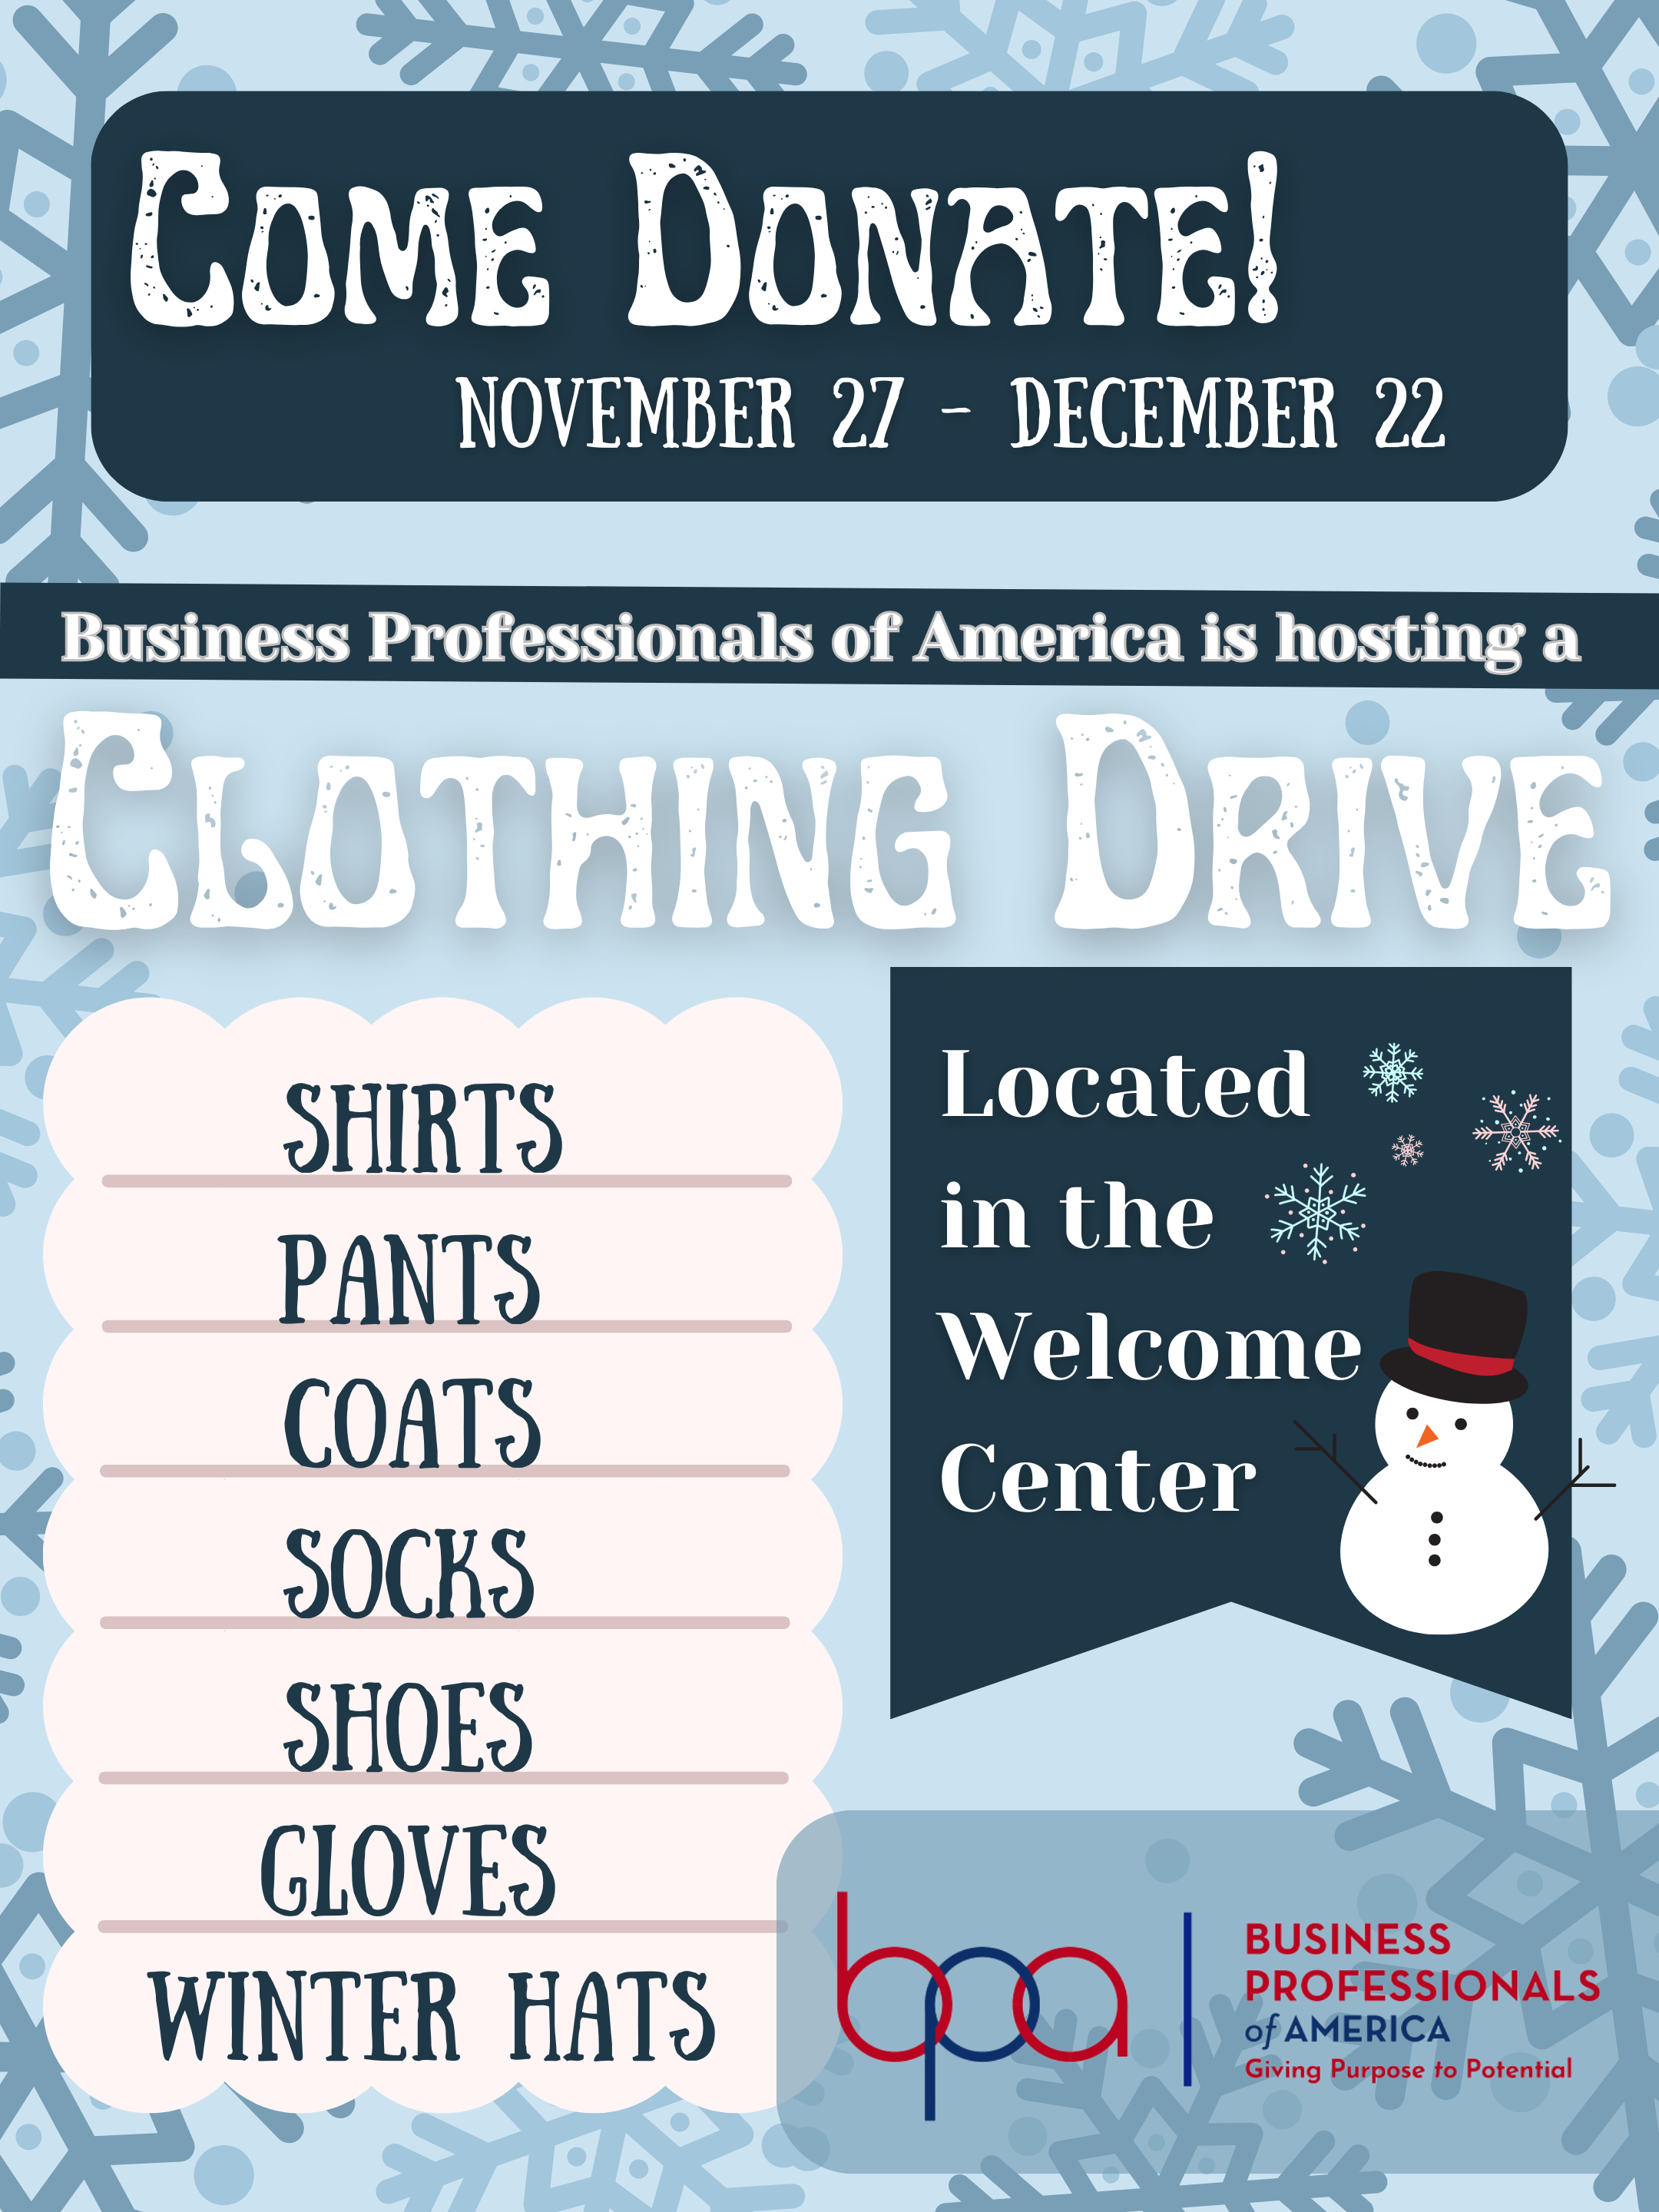 Poster describing where and when the Clothing Drive is taking place for BPA, rectangular shaped, blue color scheme